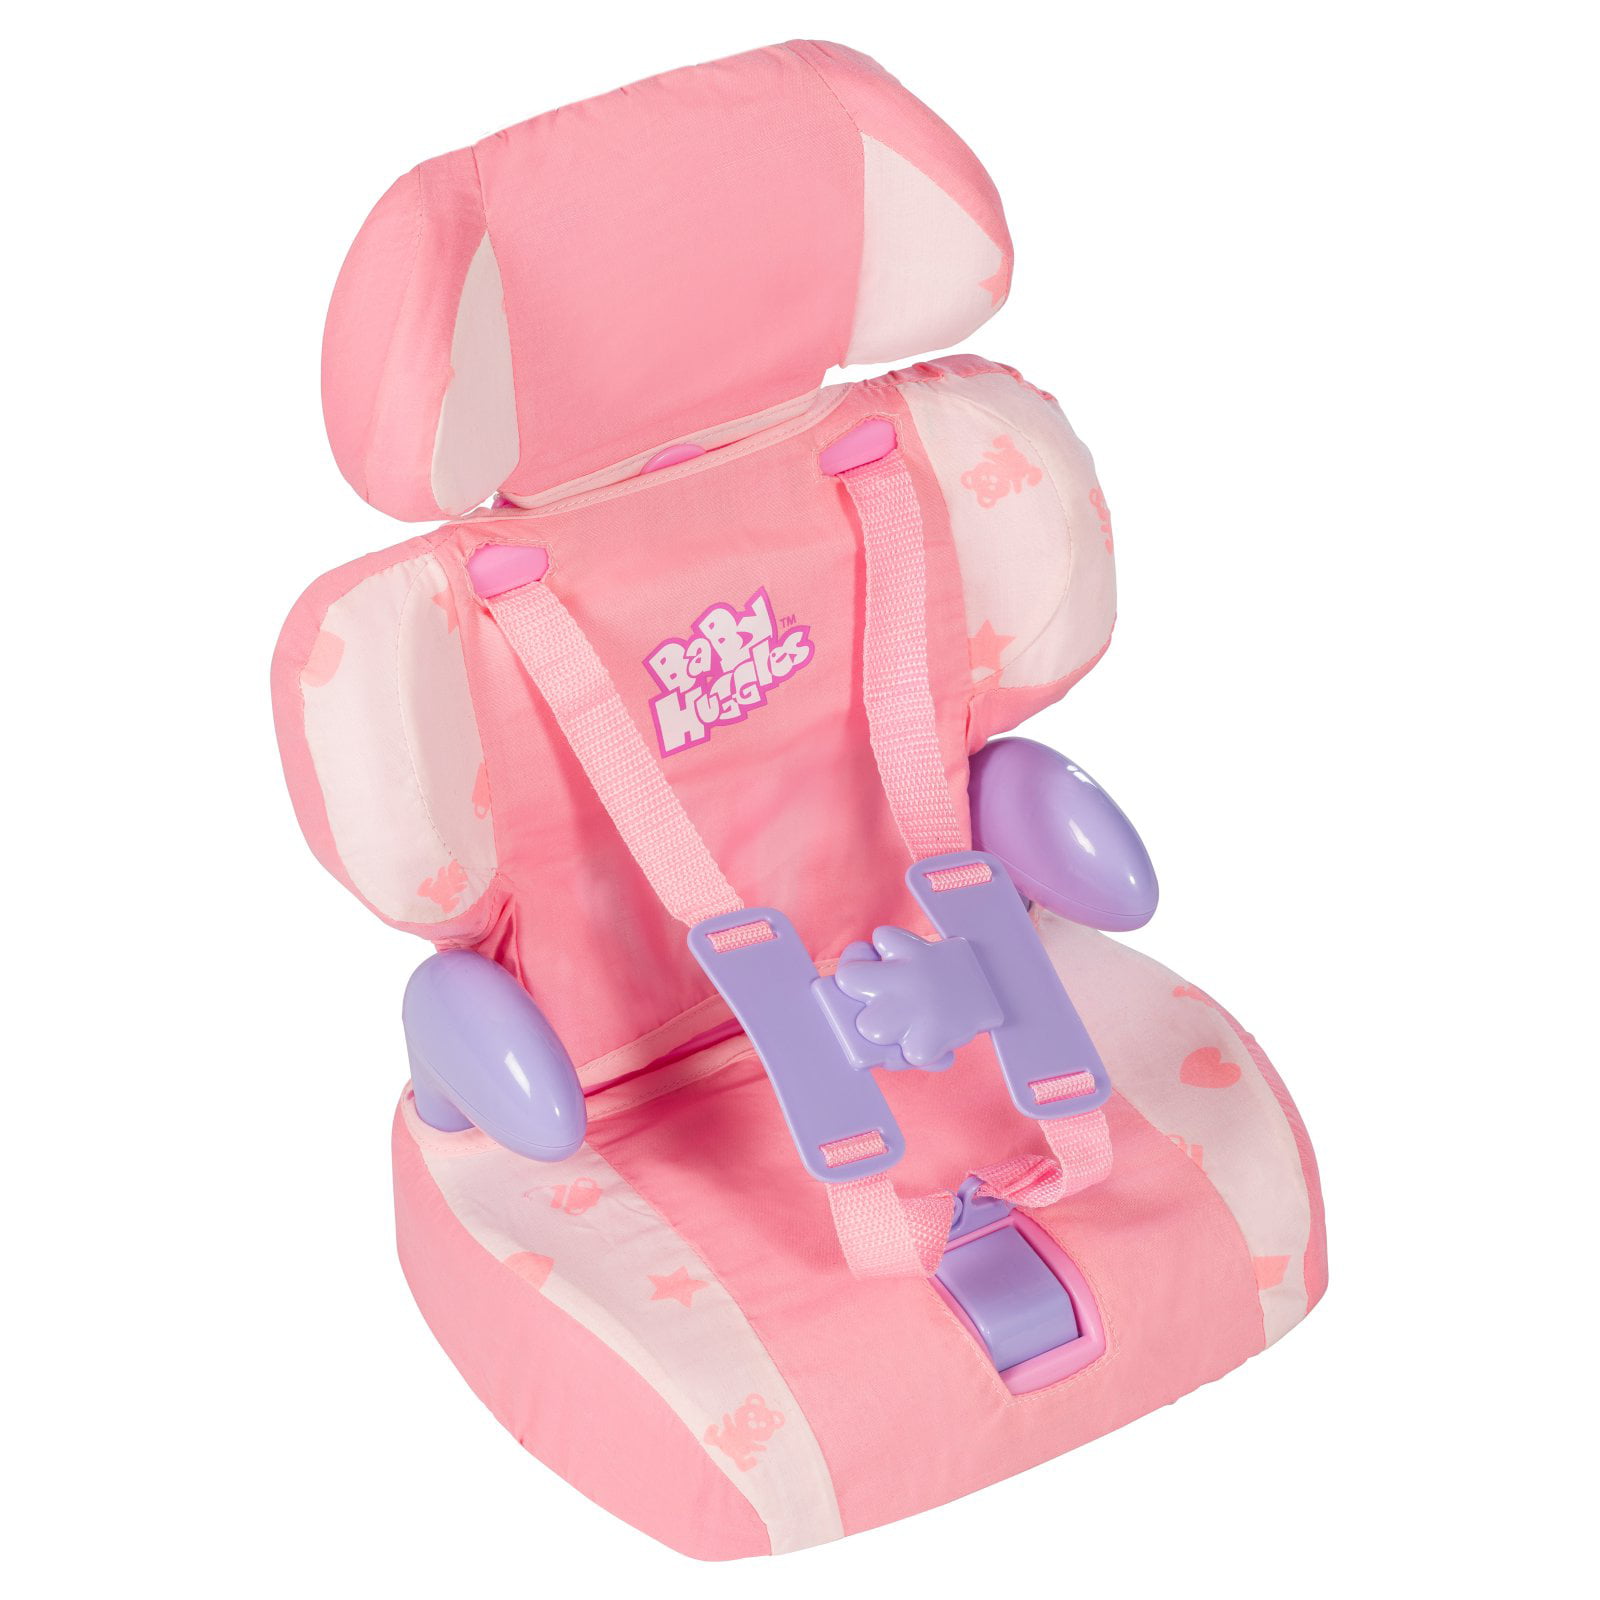 DOLLS BABY HUGGLES CAR BOOSTER SEAT CHILDRENS TOY 